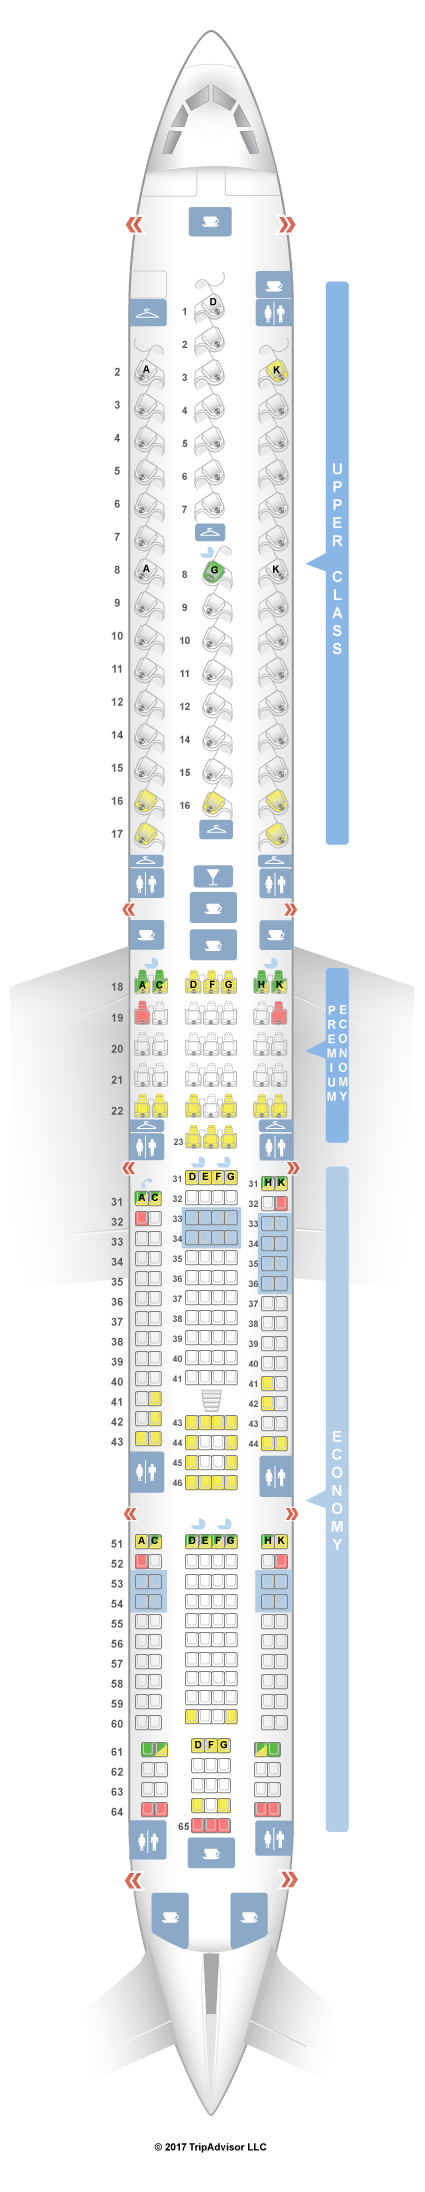 Airbus A346 Seating Chart